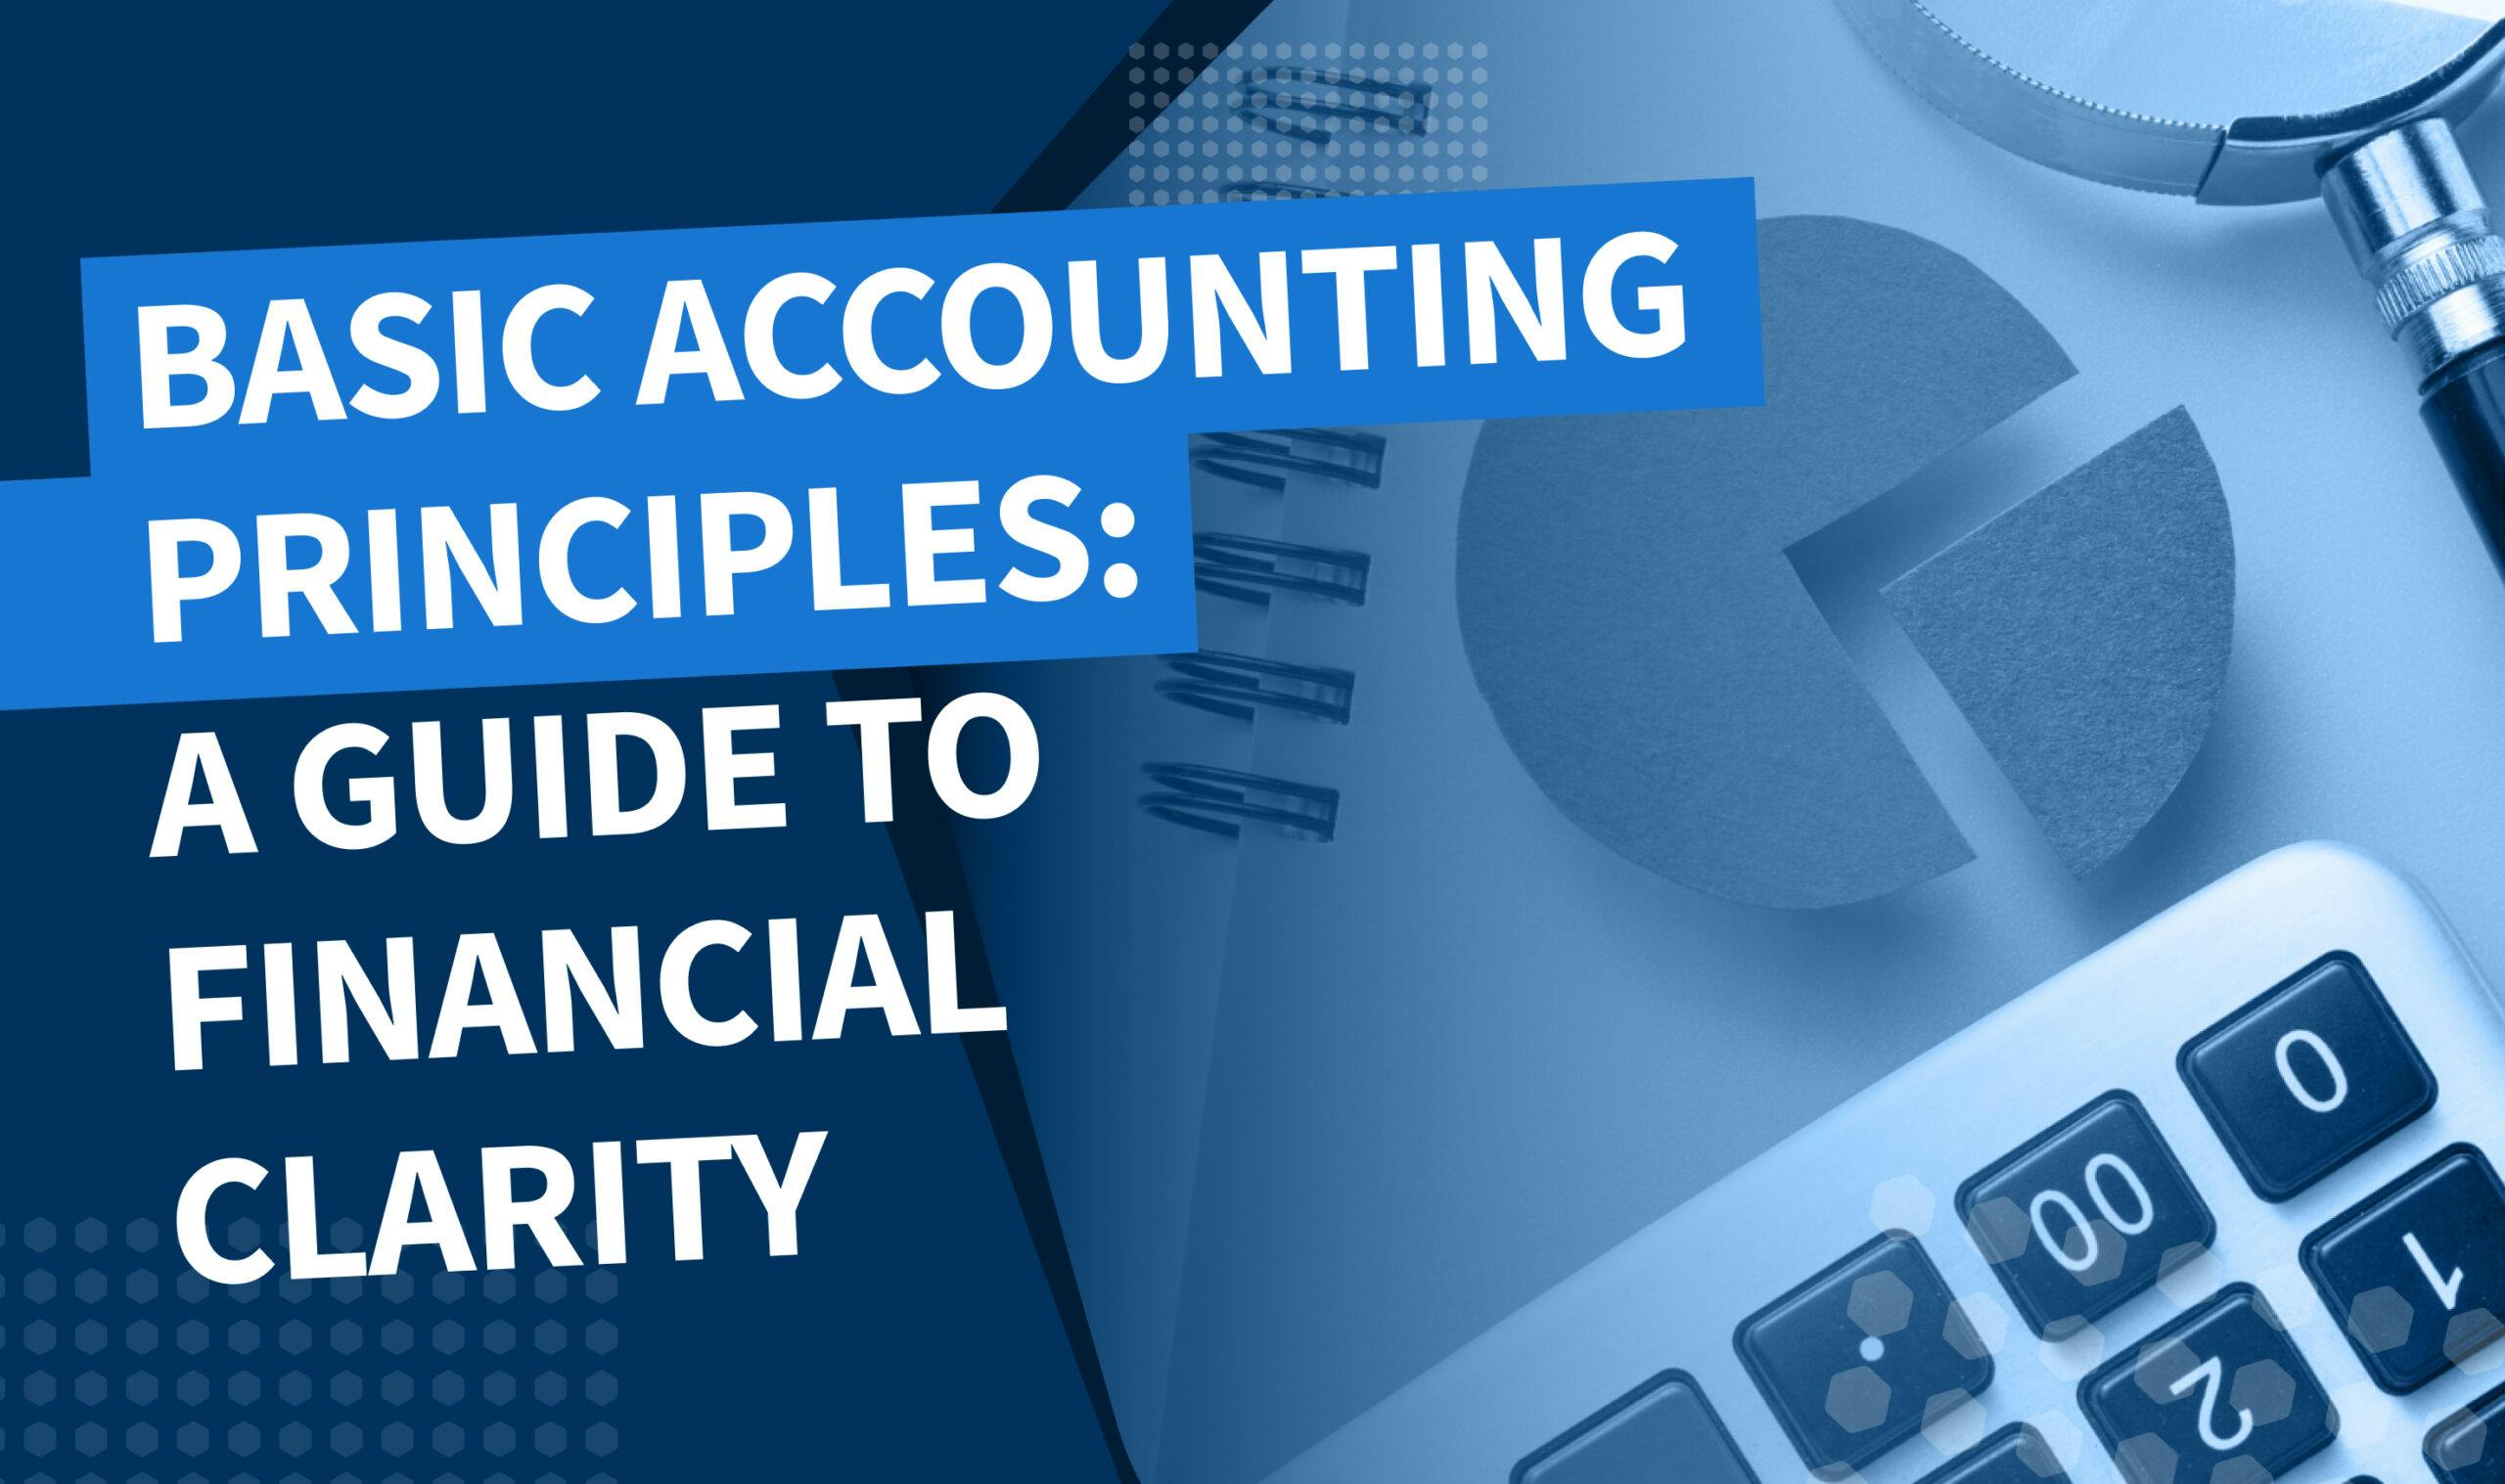 Basic accounting principles: a guide to financial clarity - Banner